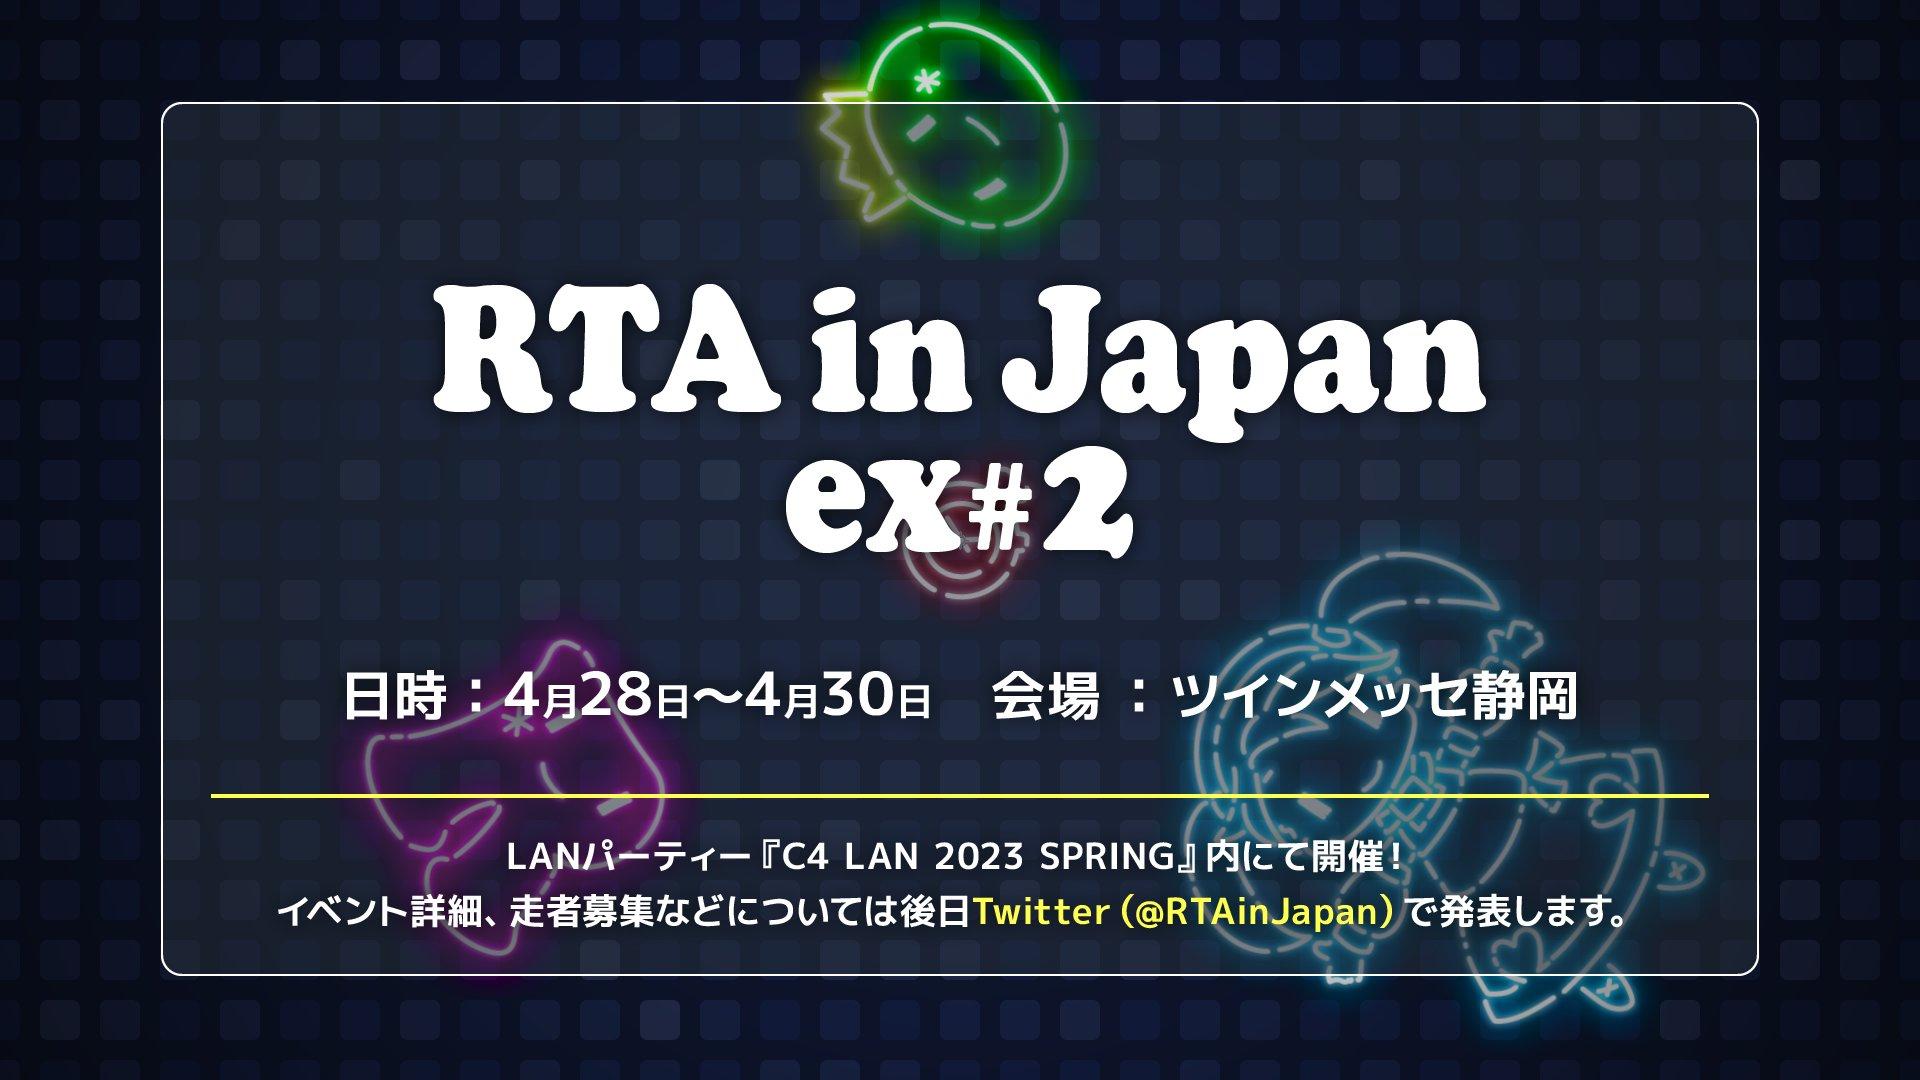 RTA in Japan ex #2 feature image